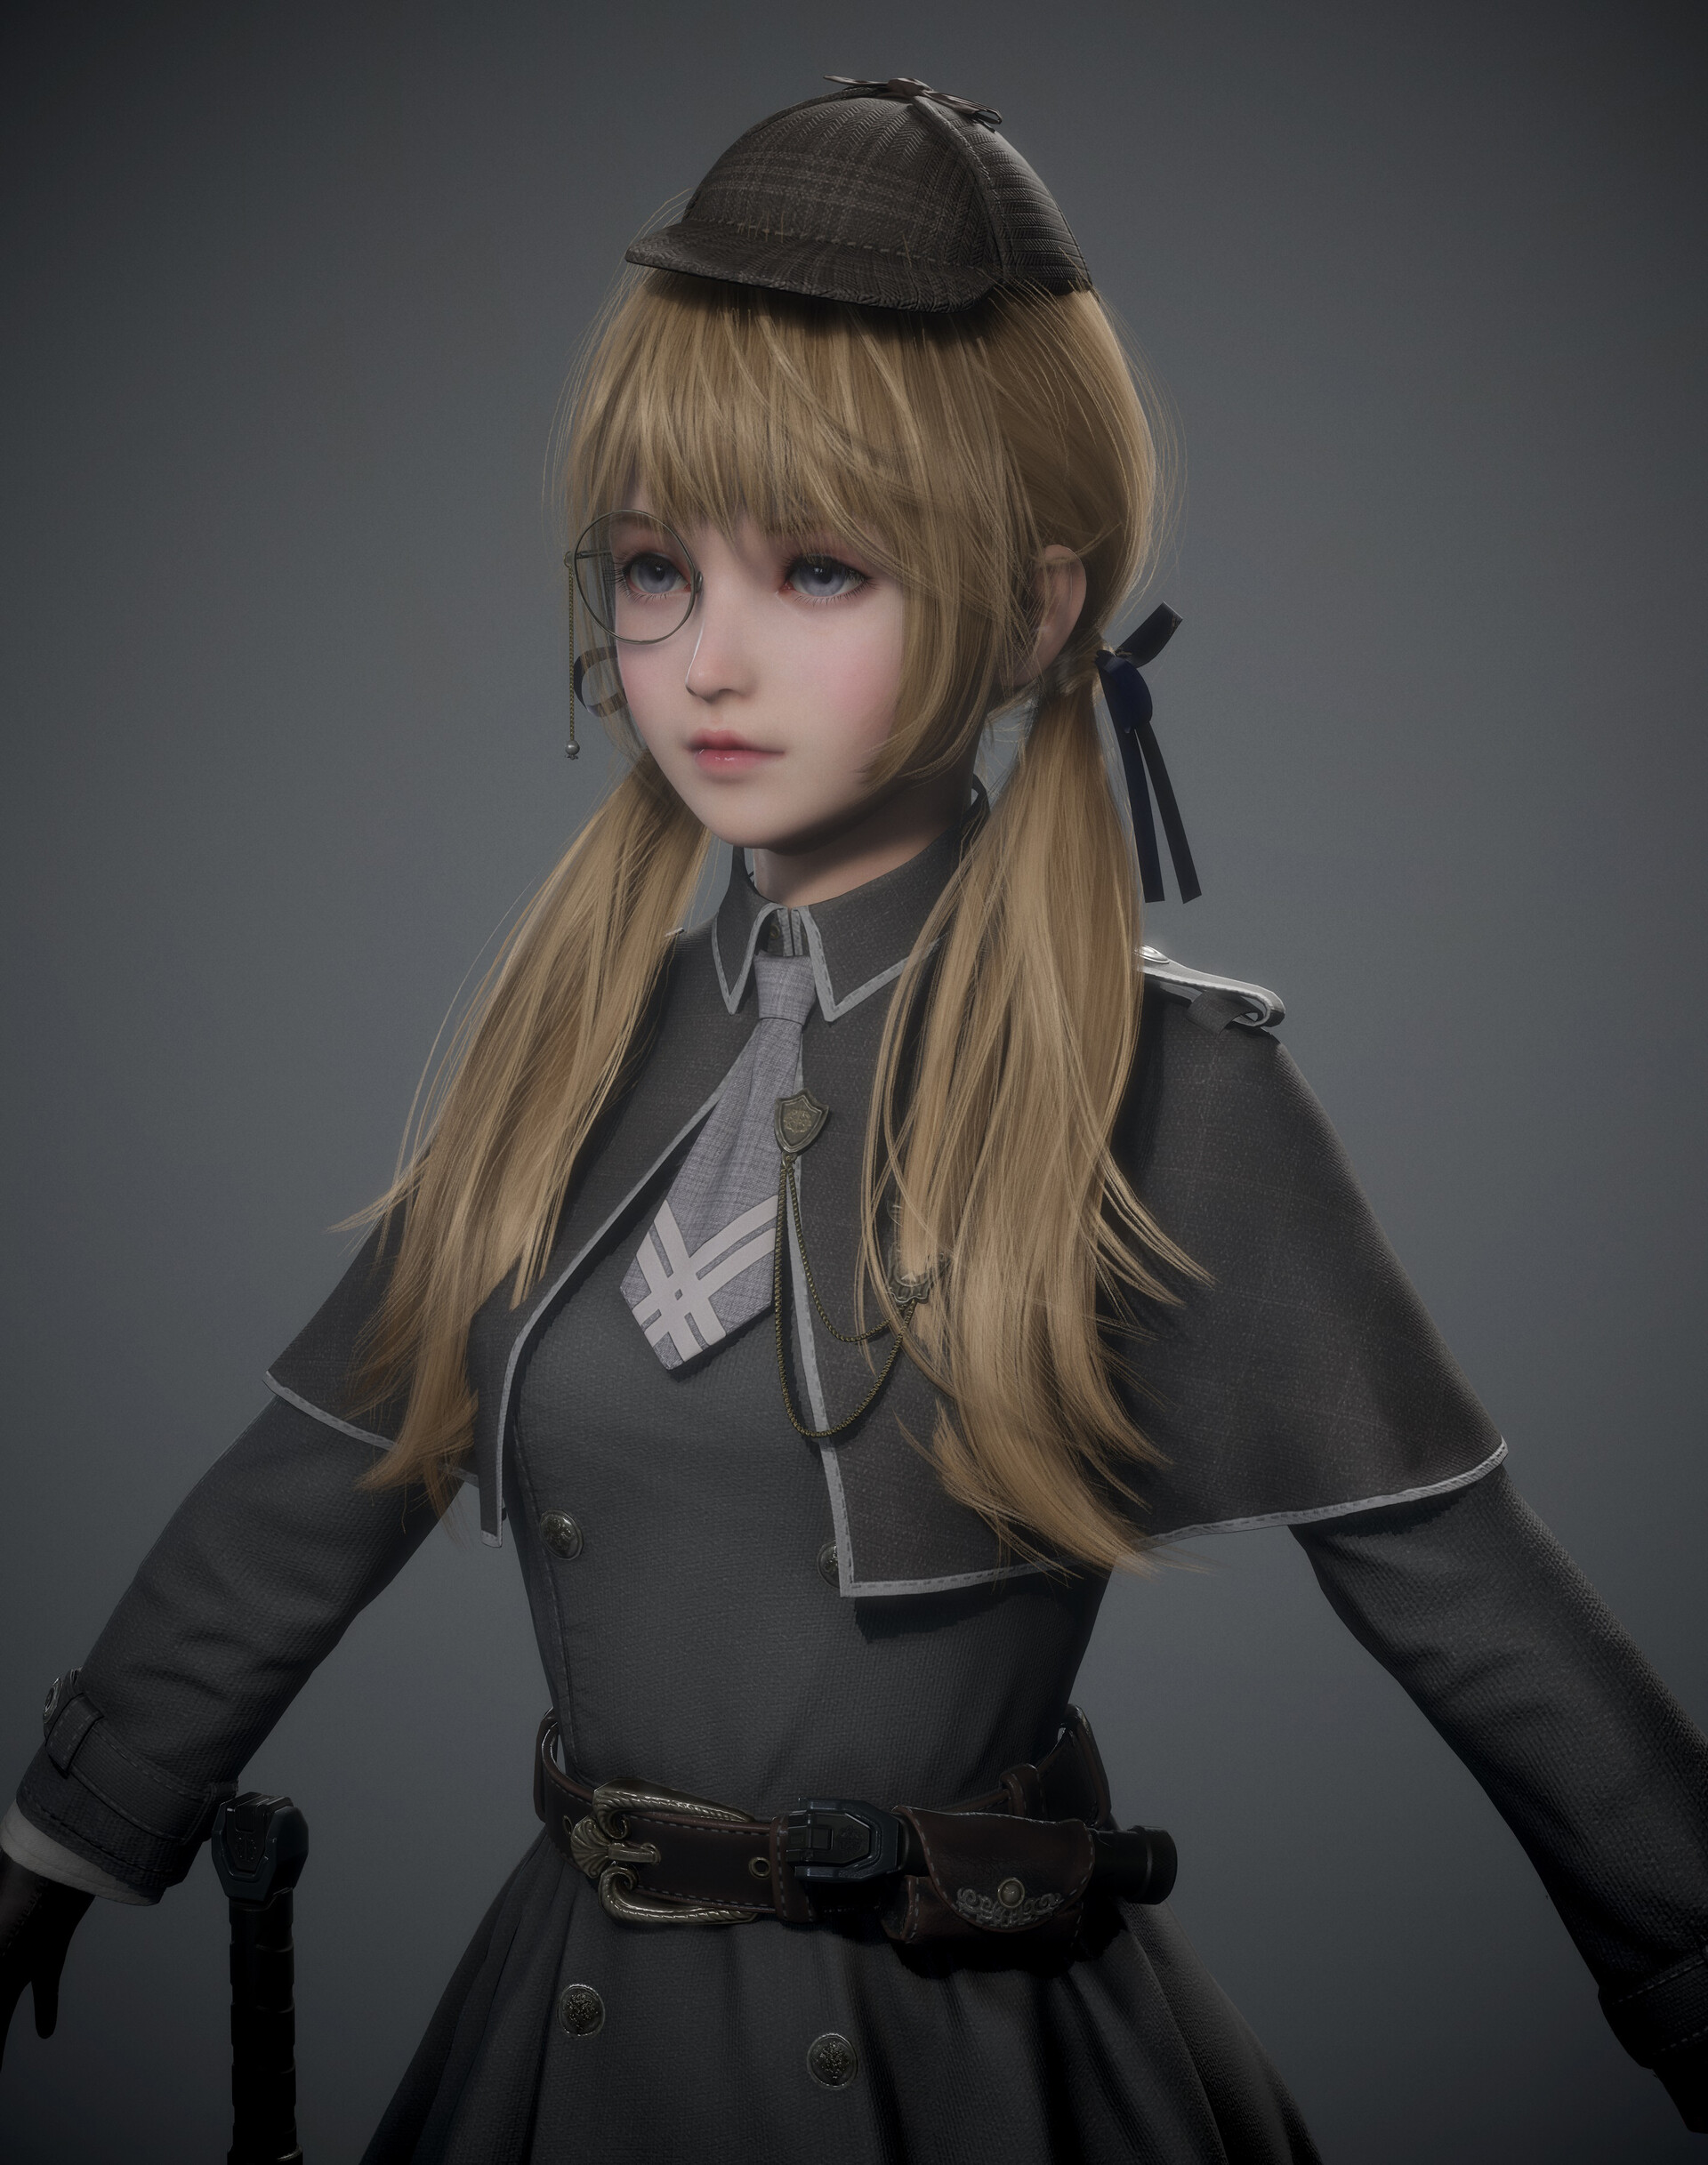 Default combat outfit set of Galatea, one of the player characters in Opera...